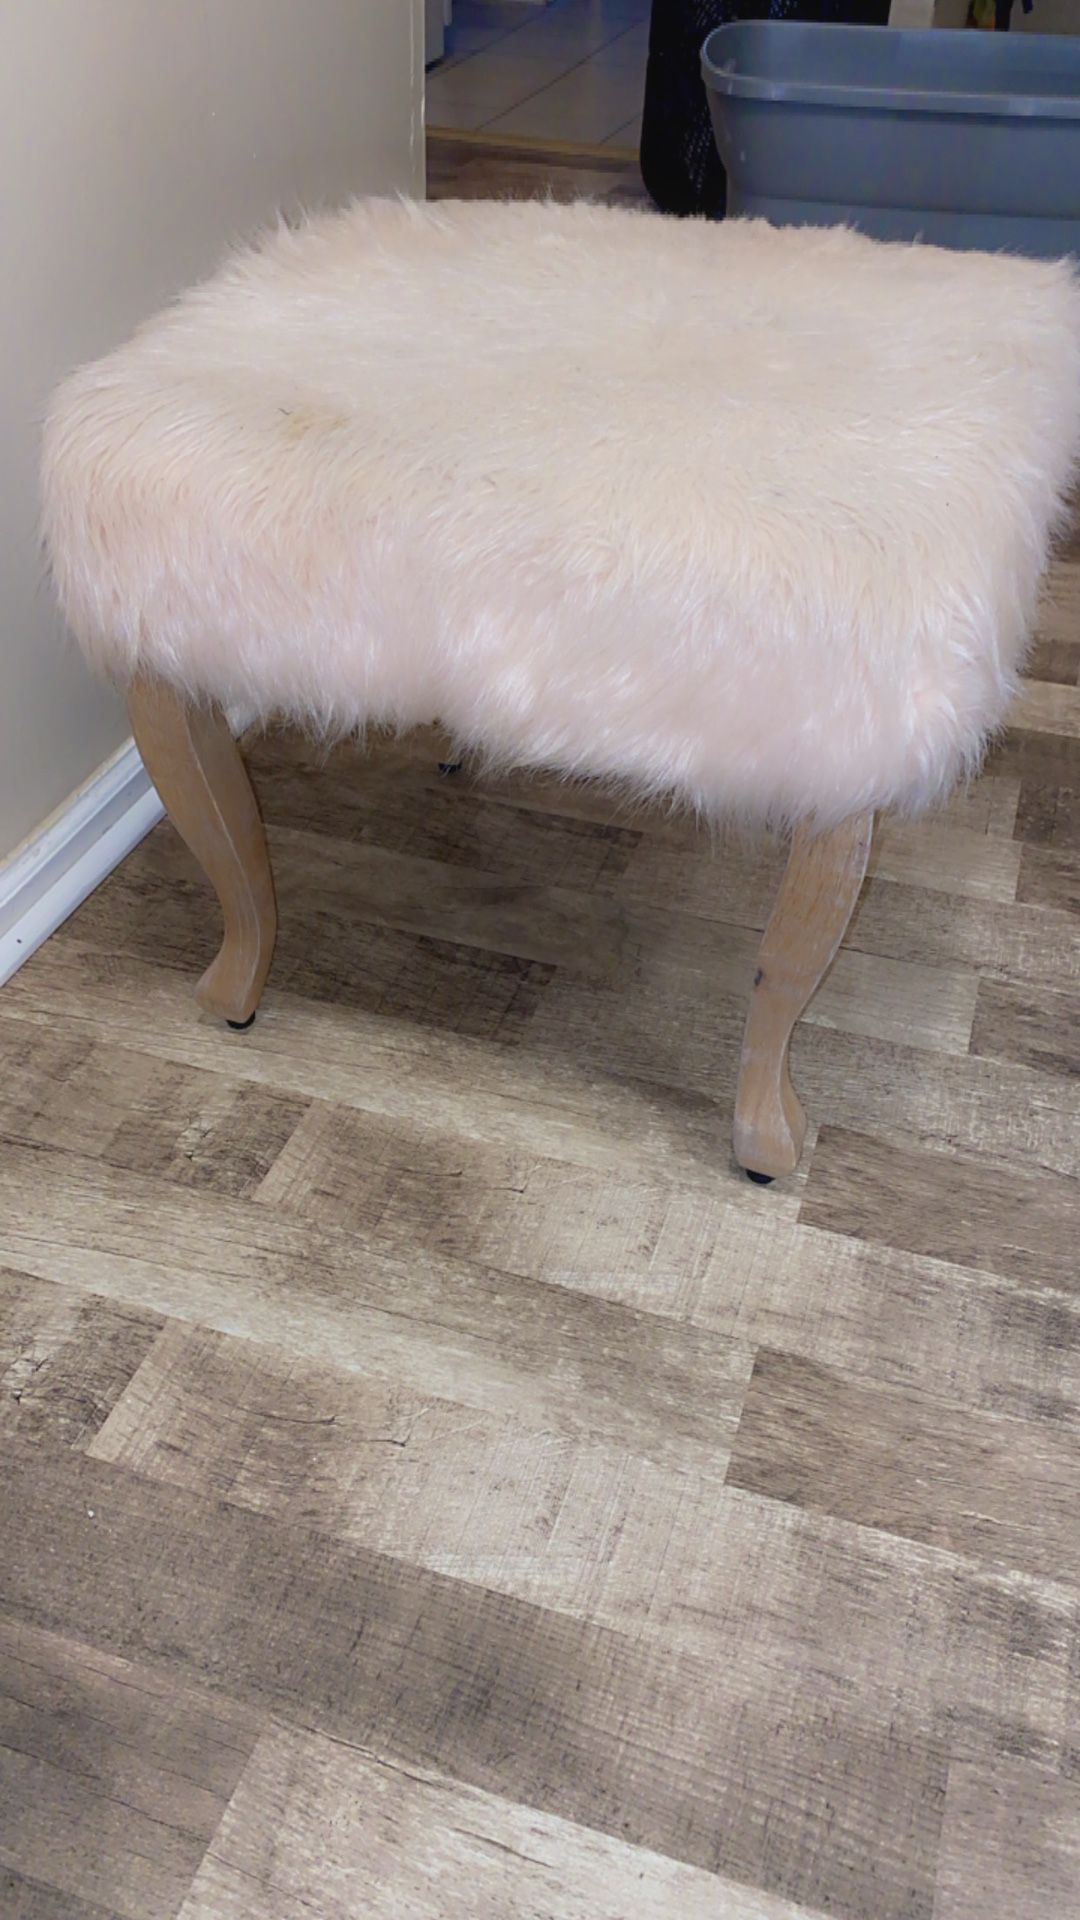 2 Large Pink Fur Stools . Fur Needs Cleaning $ 20 Each Must Pick Up 